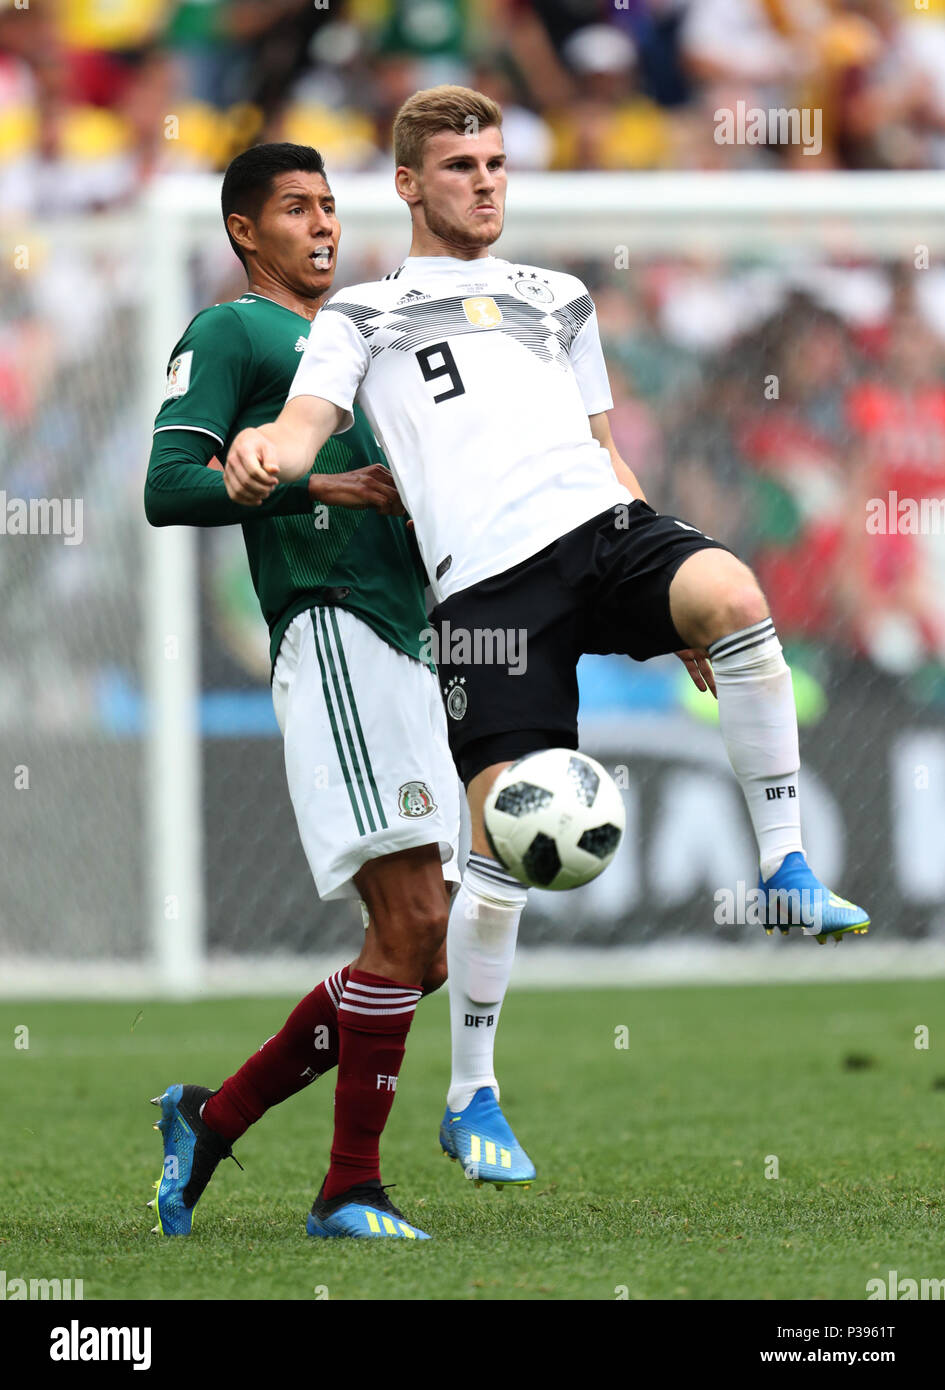 Hugo Ayala & Timo Werner GERMANY V MEXICO GERMANY V MEXICO, 2018 FIFA WORLD CUP RUSSIA 17 June 2018 GBC8319 2018 FIFA World Cup Russia STRICTLY EDITORIAL USE ONLY. If The Player/Players Depicted In This Image Is/Are Playing For An English Club Or The England National Team. Then This Image May Only Be Used For Editorial Purposes. No Commercial Use. The Following Usages Are Also Restricted EVEN IF IN AN EDITORIAL CONTEXT: Use in conjuction with, or part of, any unauthorized audio, video, data, fixture lists, club/league logos, Betting, Games or any 'live' services. Also Rest Stock Photo